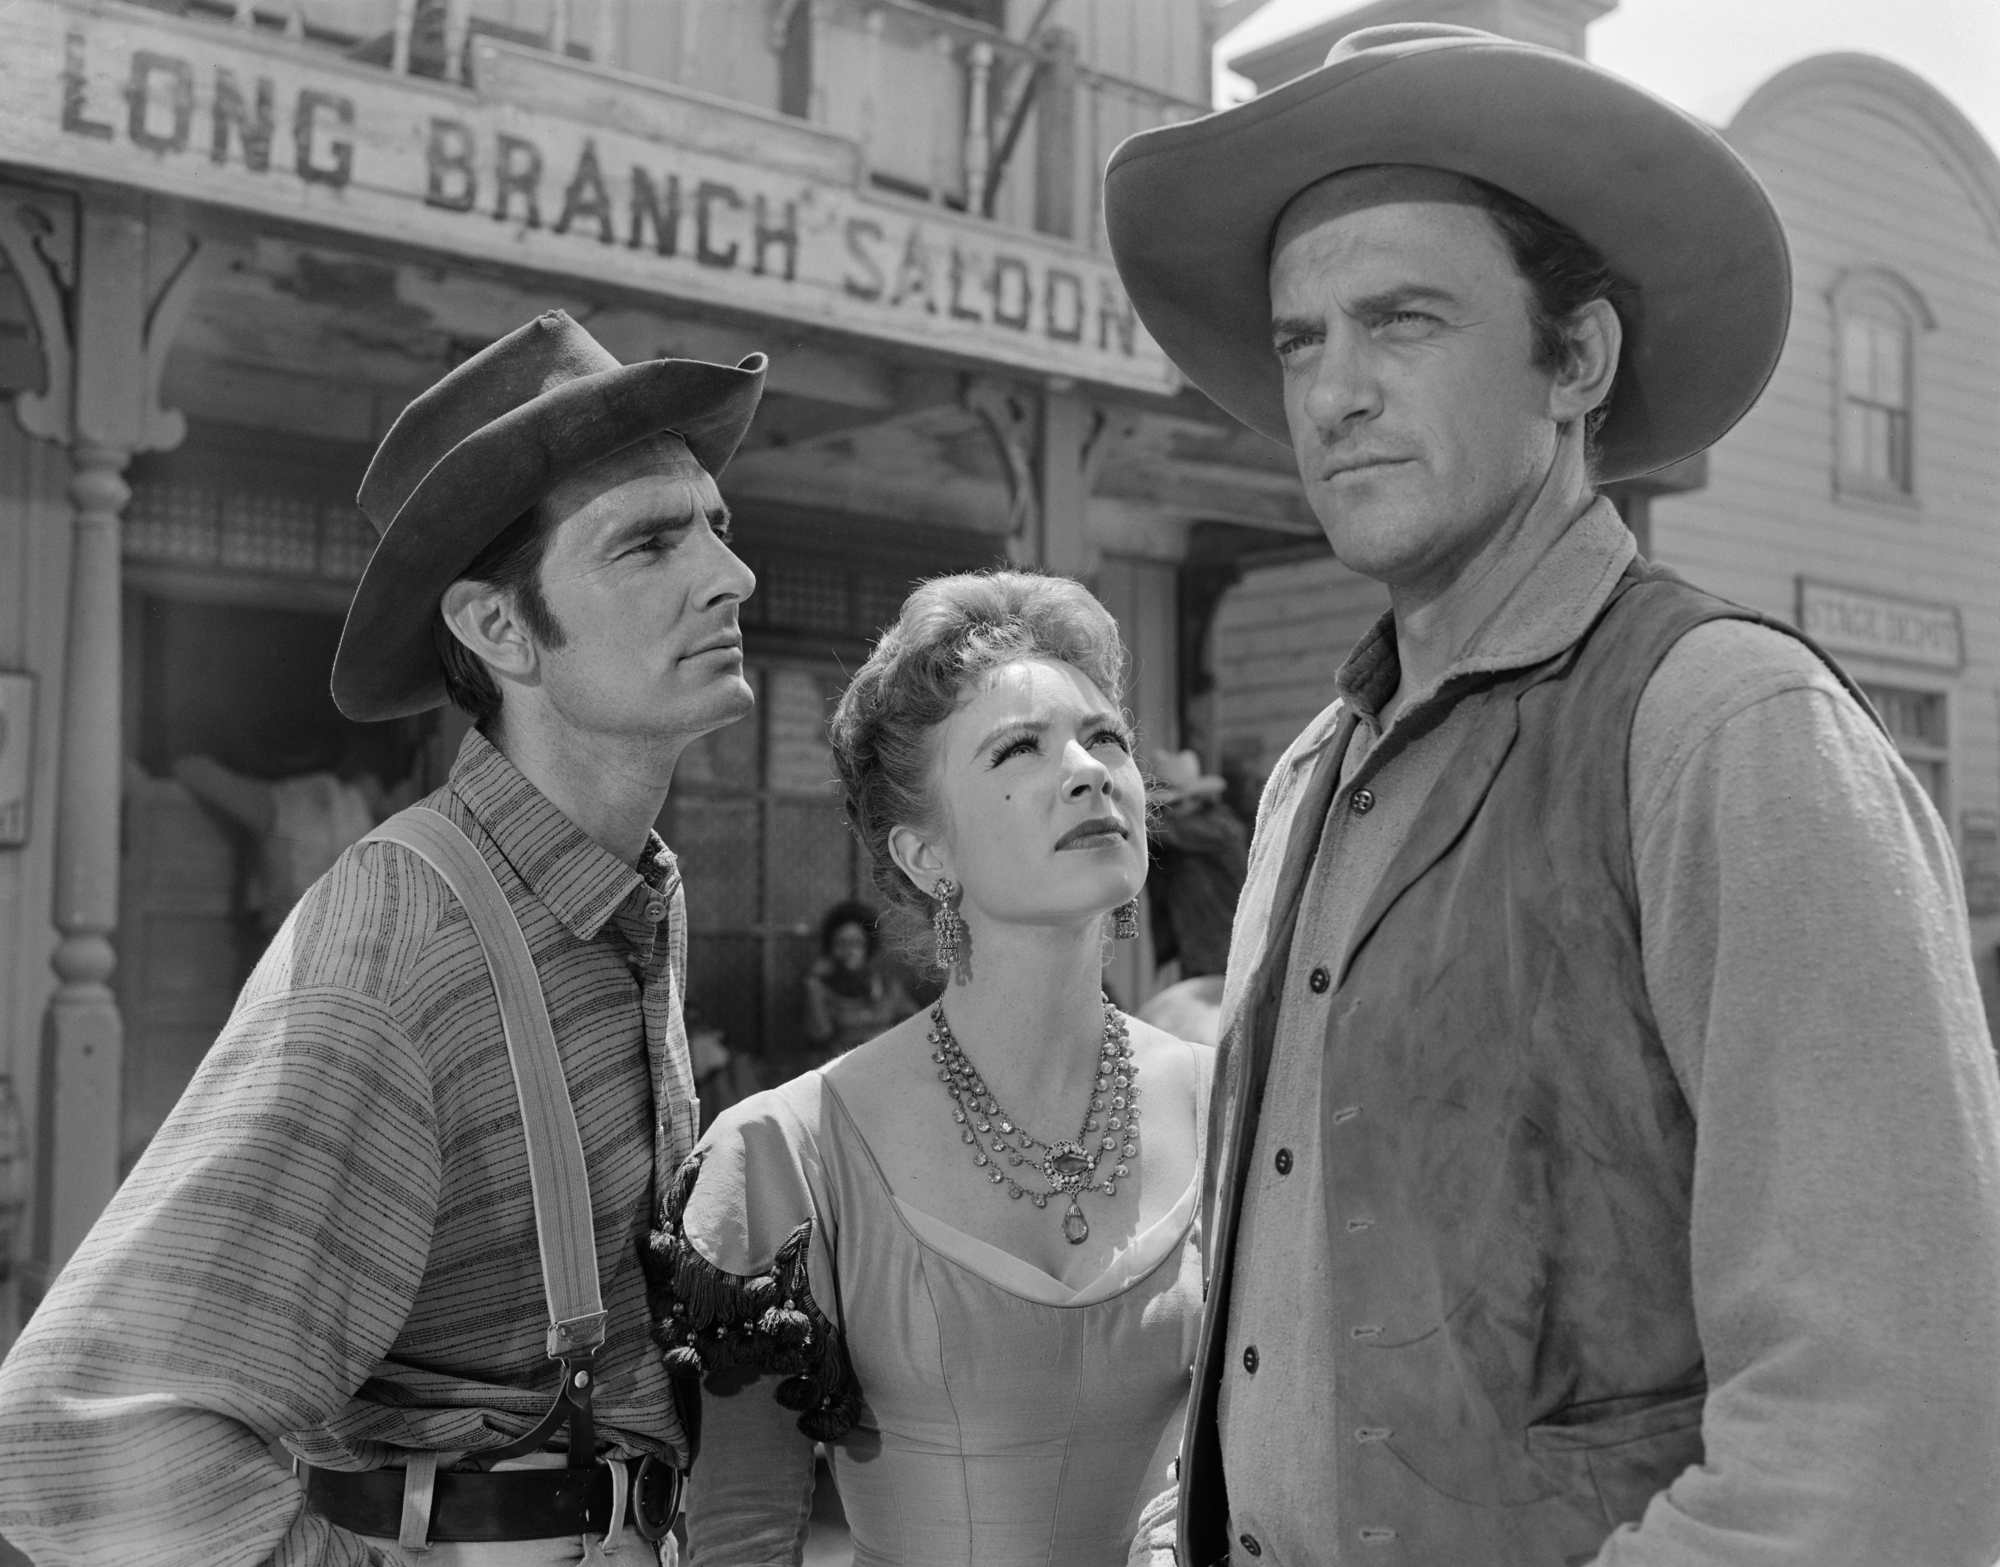 'Gunsmoke' Season 4 Dennis Weaver as Chester Goode, Amanda Blake as Kitty Russell, and James Arness as Matt Dillon. Chester and Kitty are looking up at Matt, who is staring ahead in front of the Long Branch Saloon.